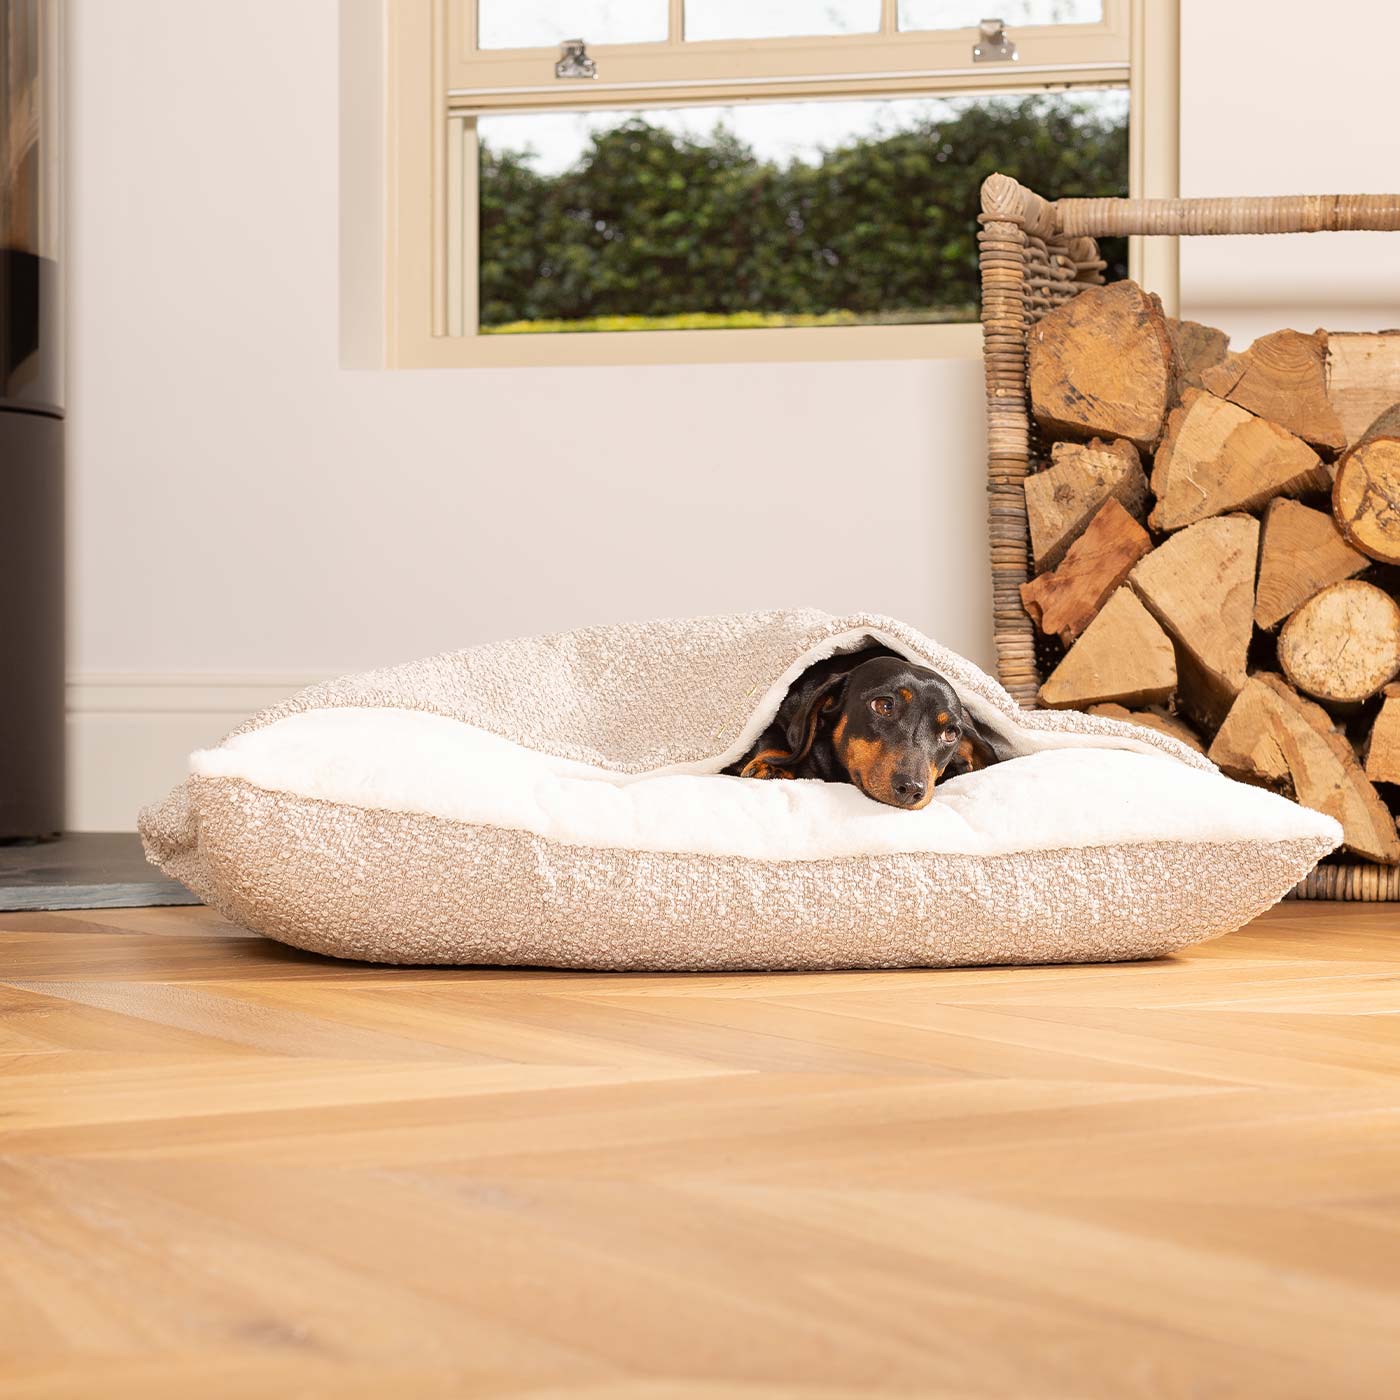 Luxury Mink Boucle Sleepy Burrows, The Perfect bed For a Pet to Burrow. Available To Personalize In Stunning Mink Bouclé Here at Lords & Labradors US